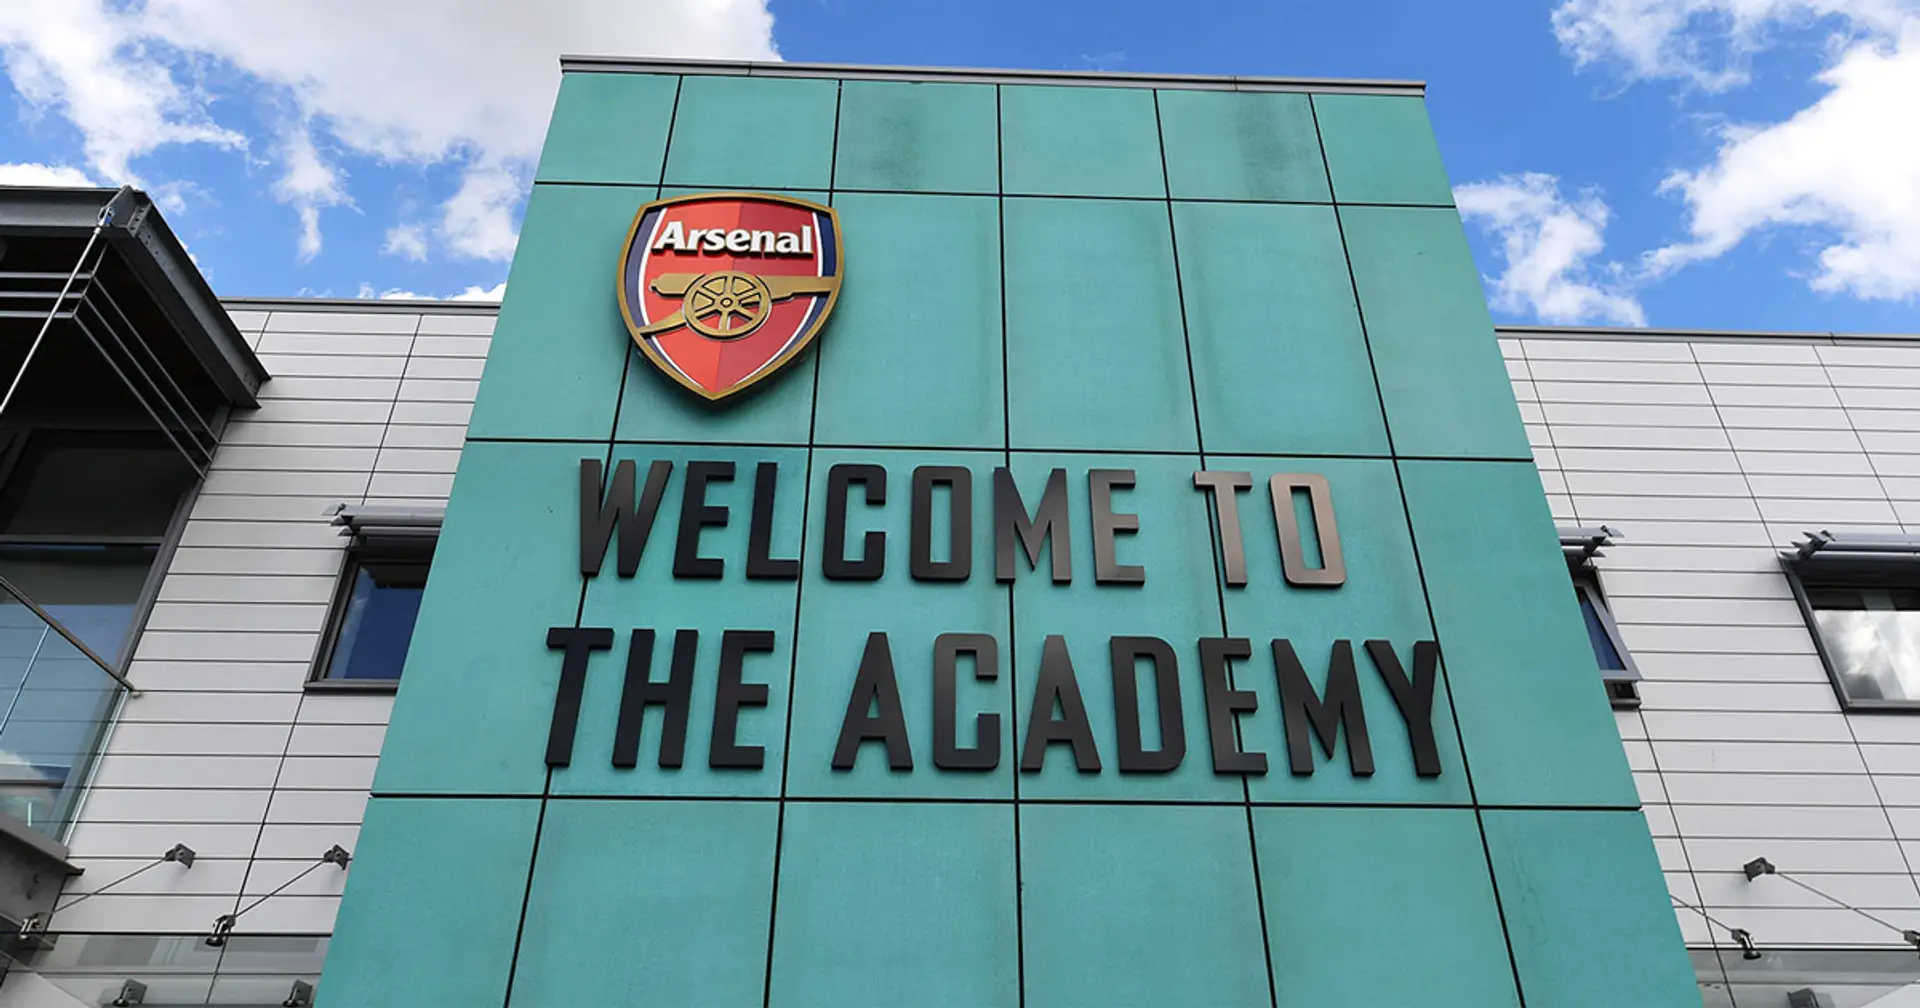 Arsenal have closed Hale End Academy after a positive COVID-19 test